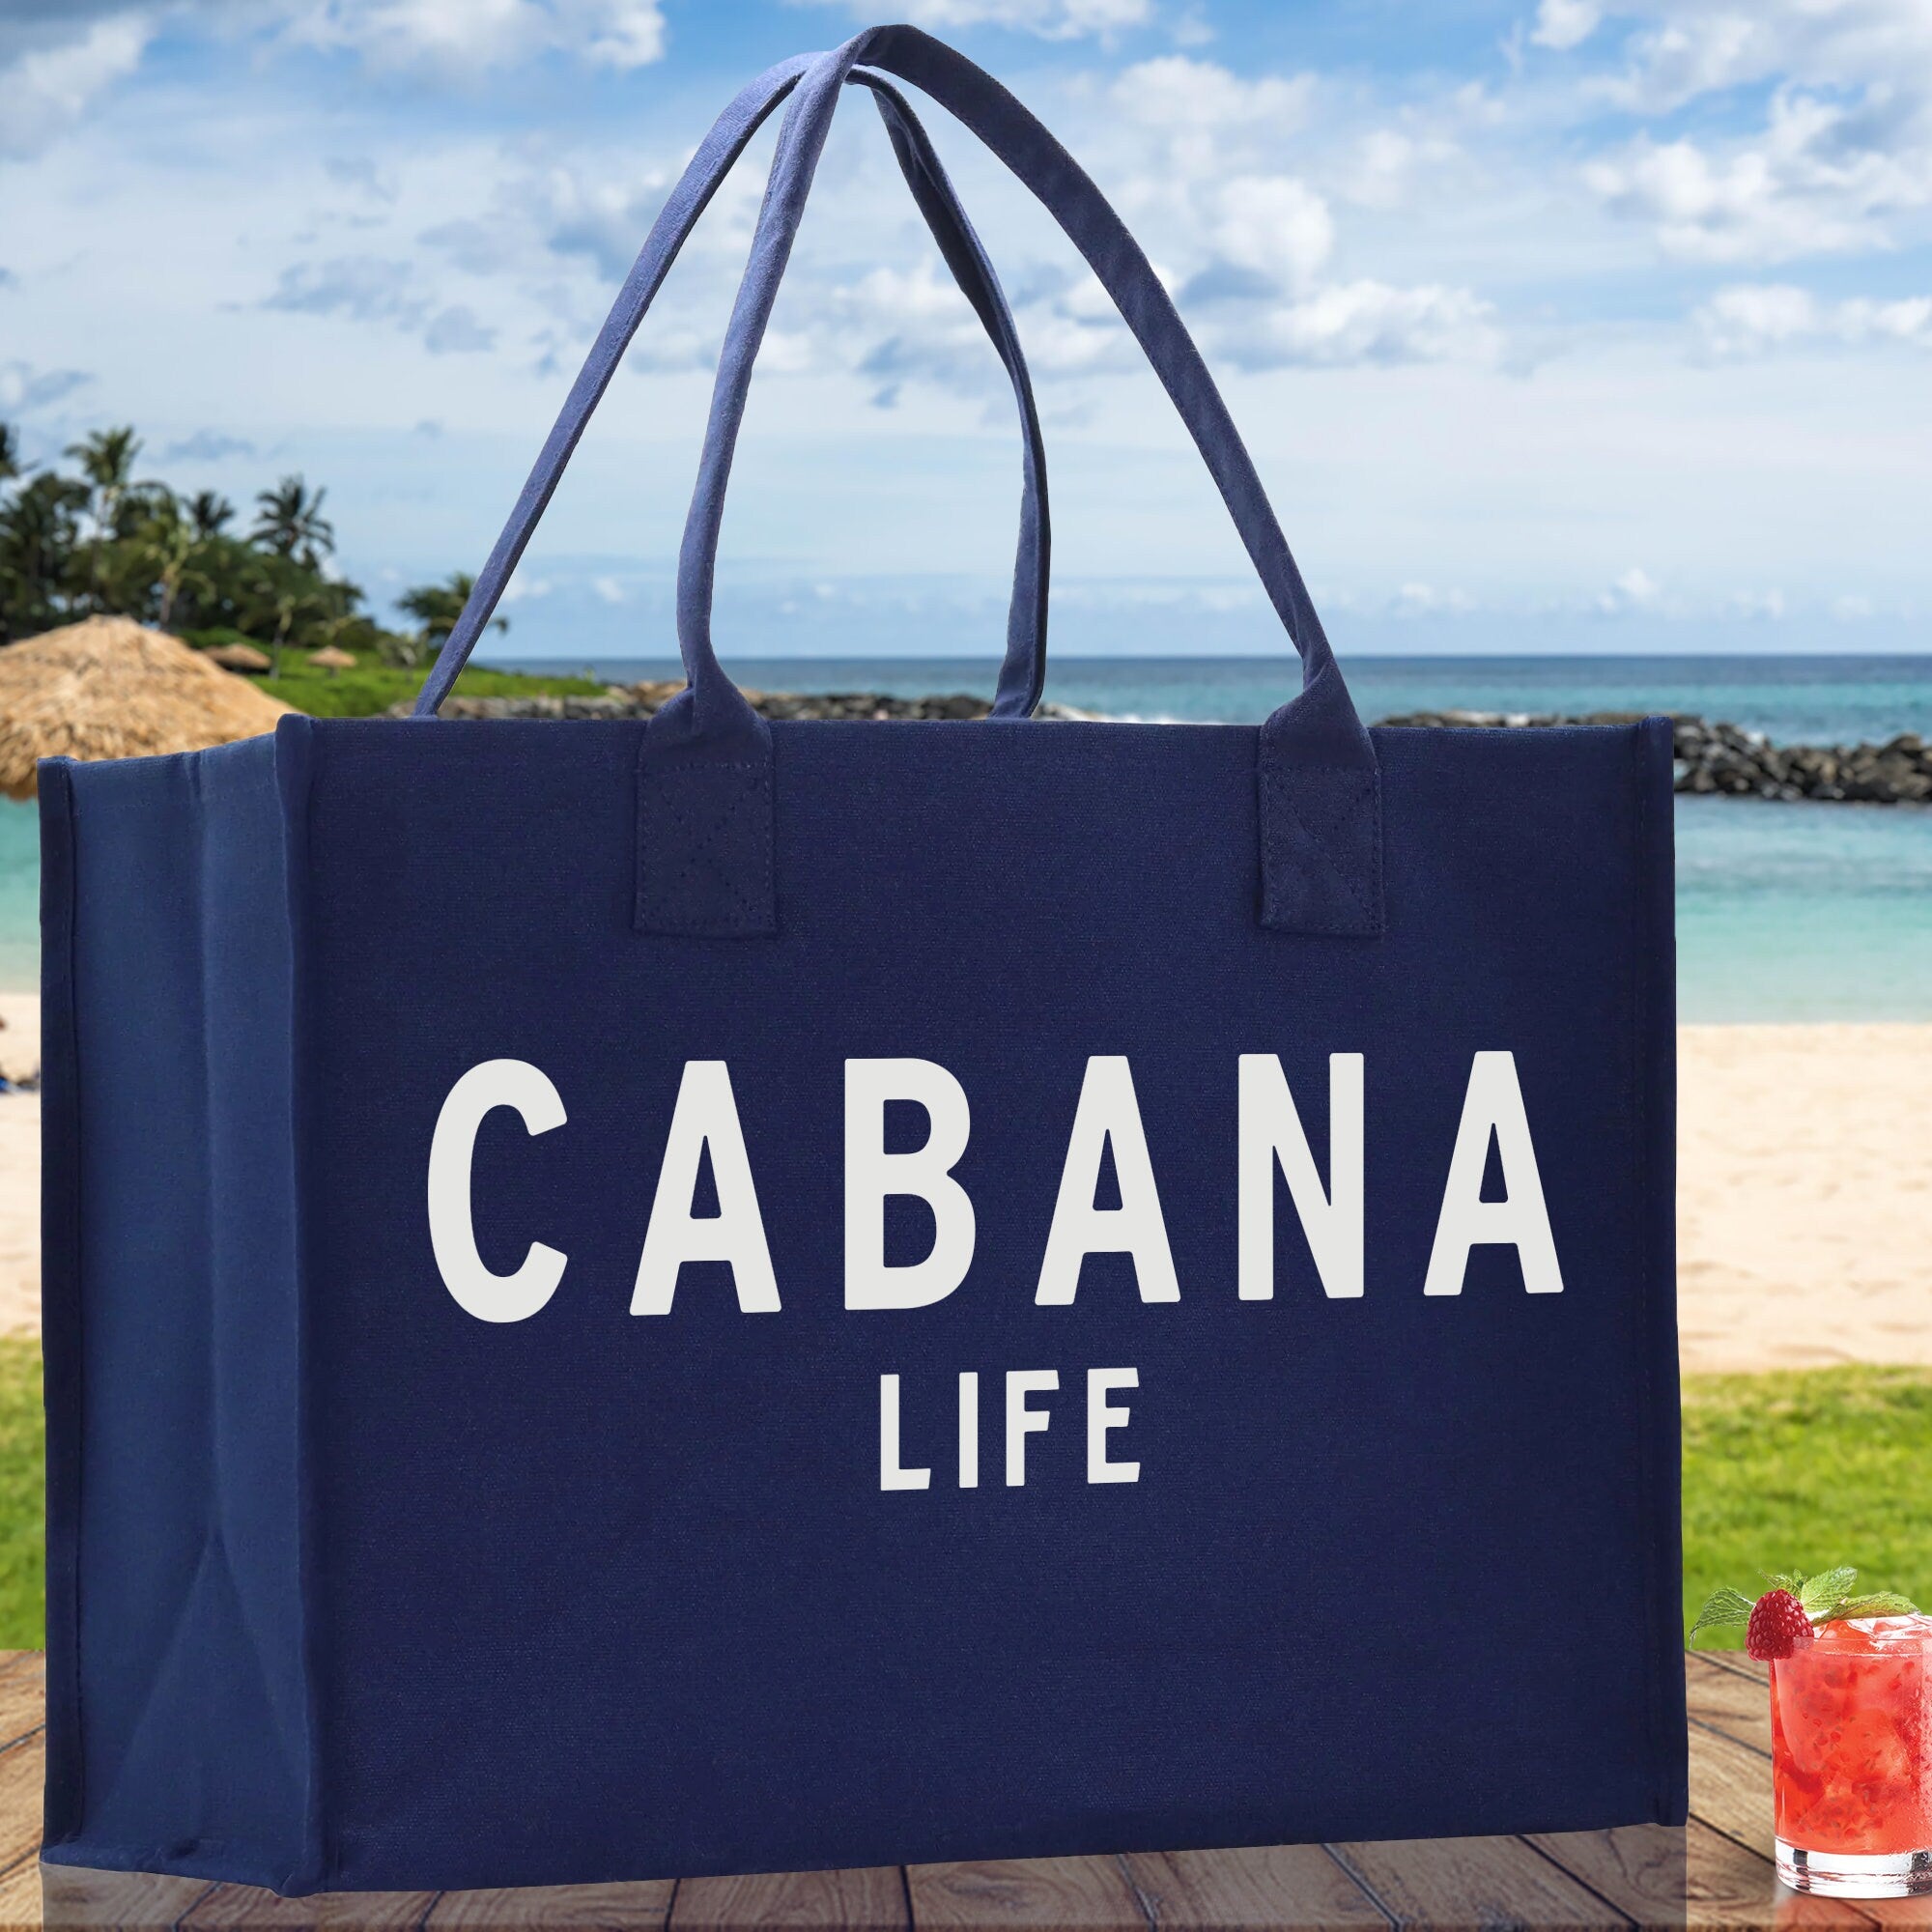 Cabana Life Cotton Canvas Chic Beach Tote Bag Multipurpose Tote Weekender Tote Gift for Her Outdoor Tote Vacation Tote Large Beach Bag